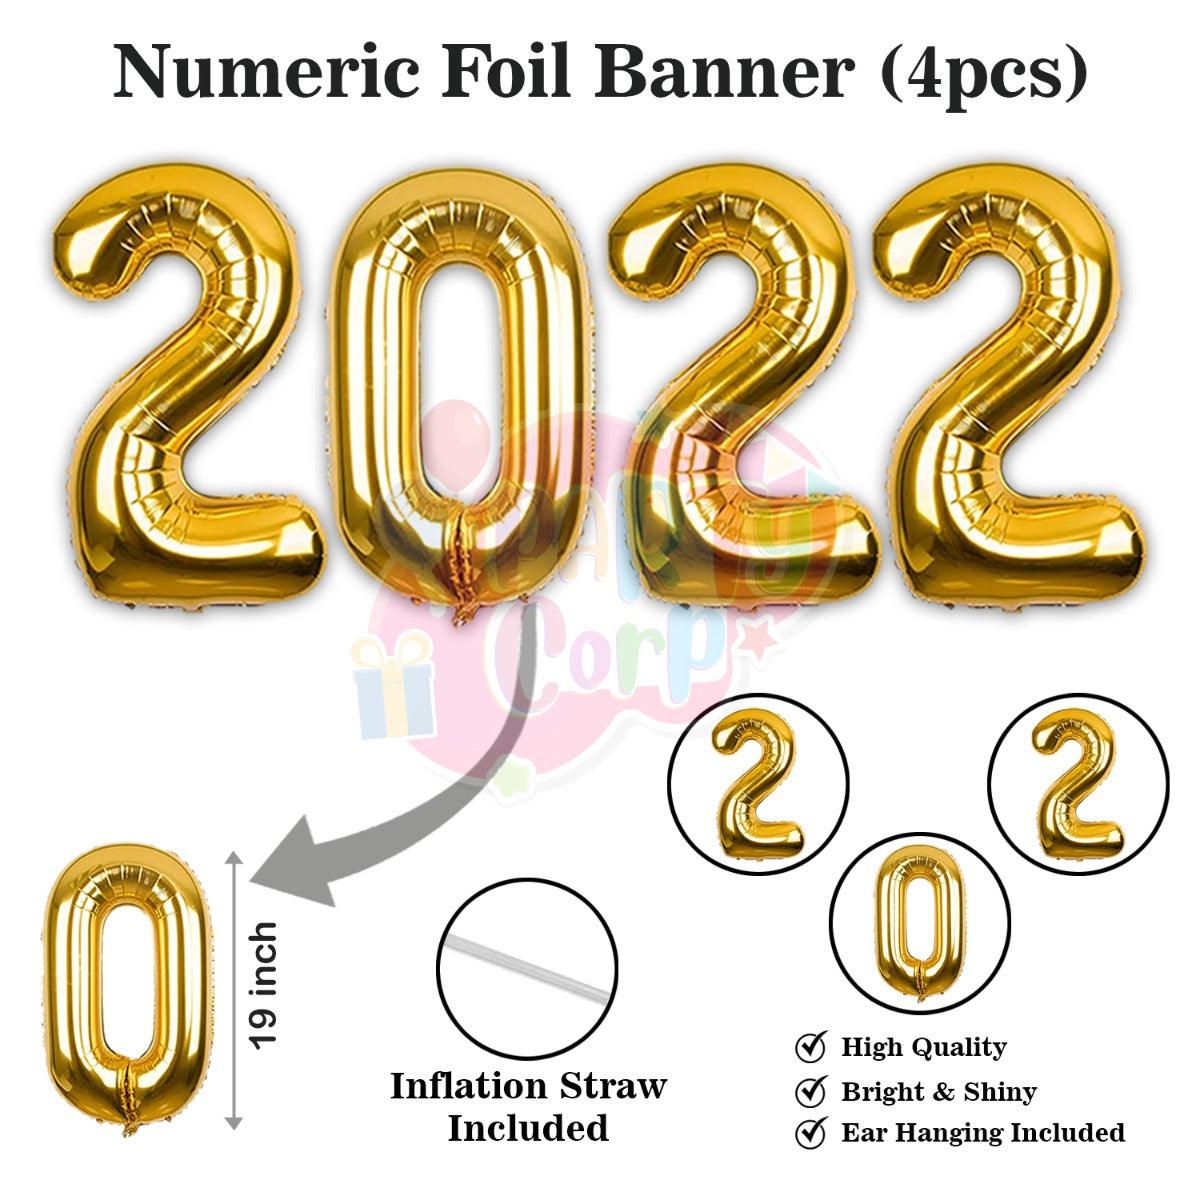 PartyCorp New Year Decoration Kit Combo 49 Pcs - Rose Gold, Gold, White Chrome, Confetti Balloon, Gold HNY Banner, Silver Curtain, Tassel, (Rose Gold Star, 2022 Digit, Wine and Champagne Bottle) Foils